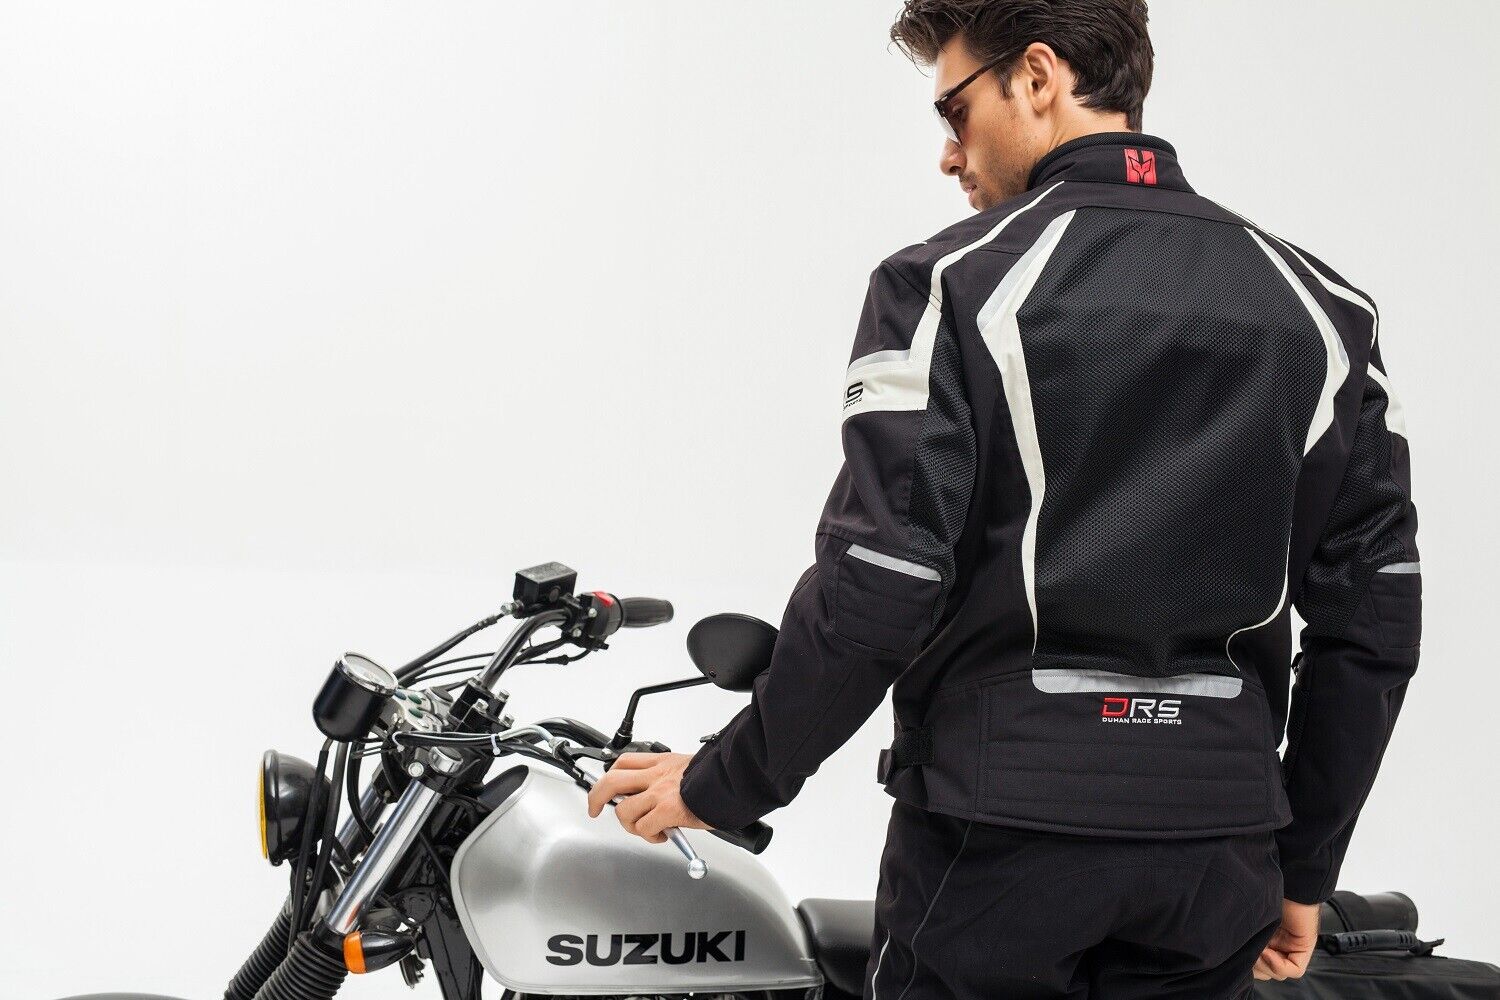 Motorcycle Summer Air Mesh Breathable Riding Jacket with CE Armour Reflective Body Protection - KIYOKI